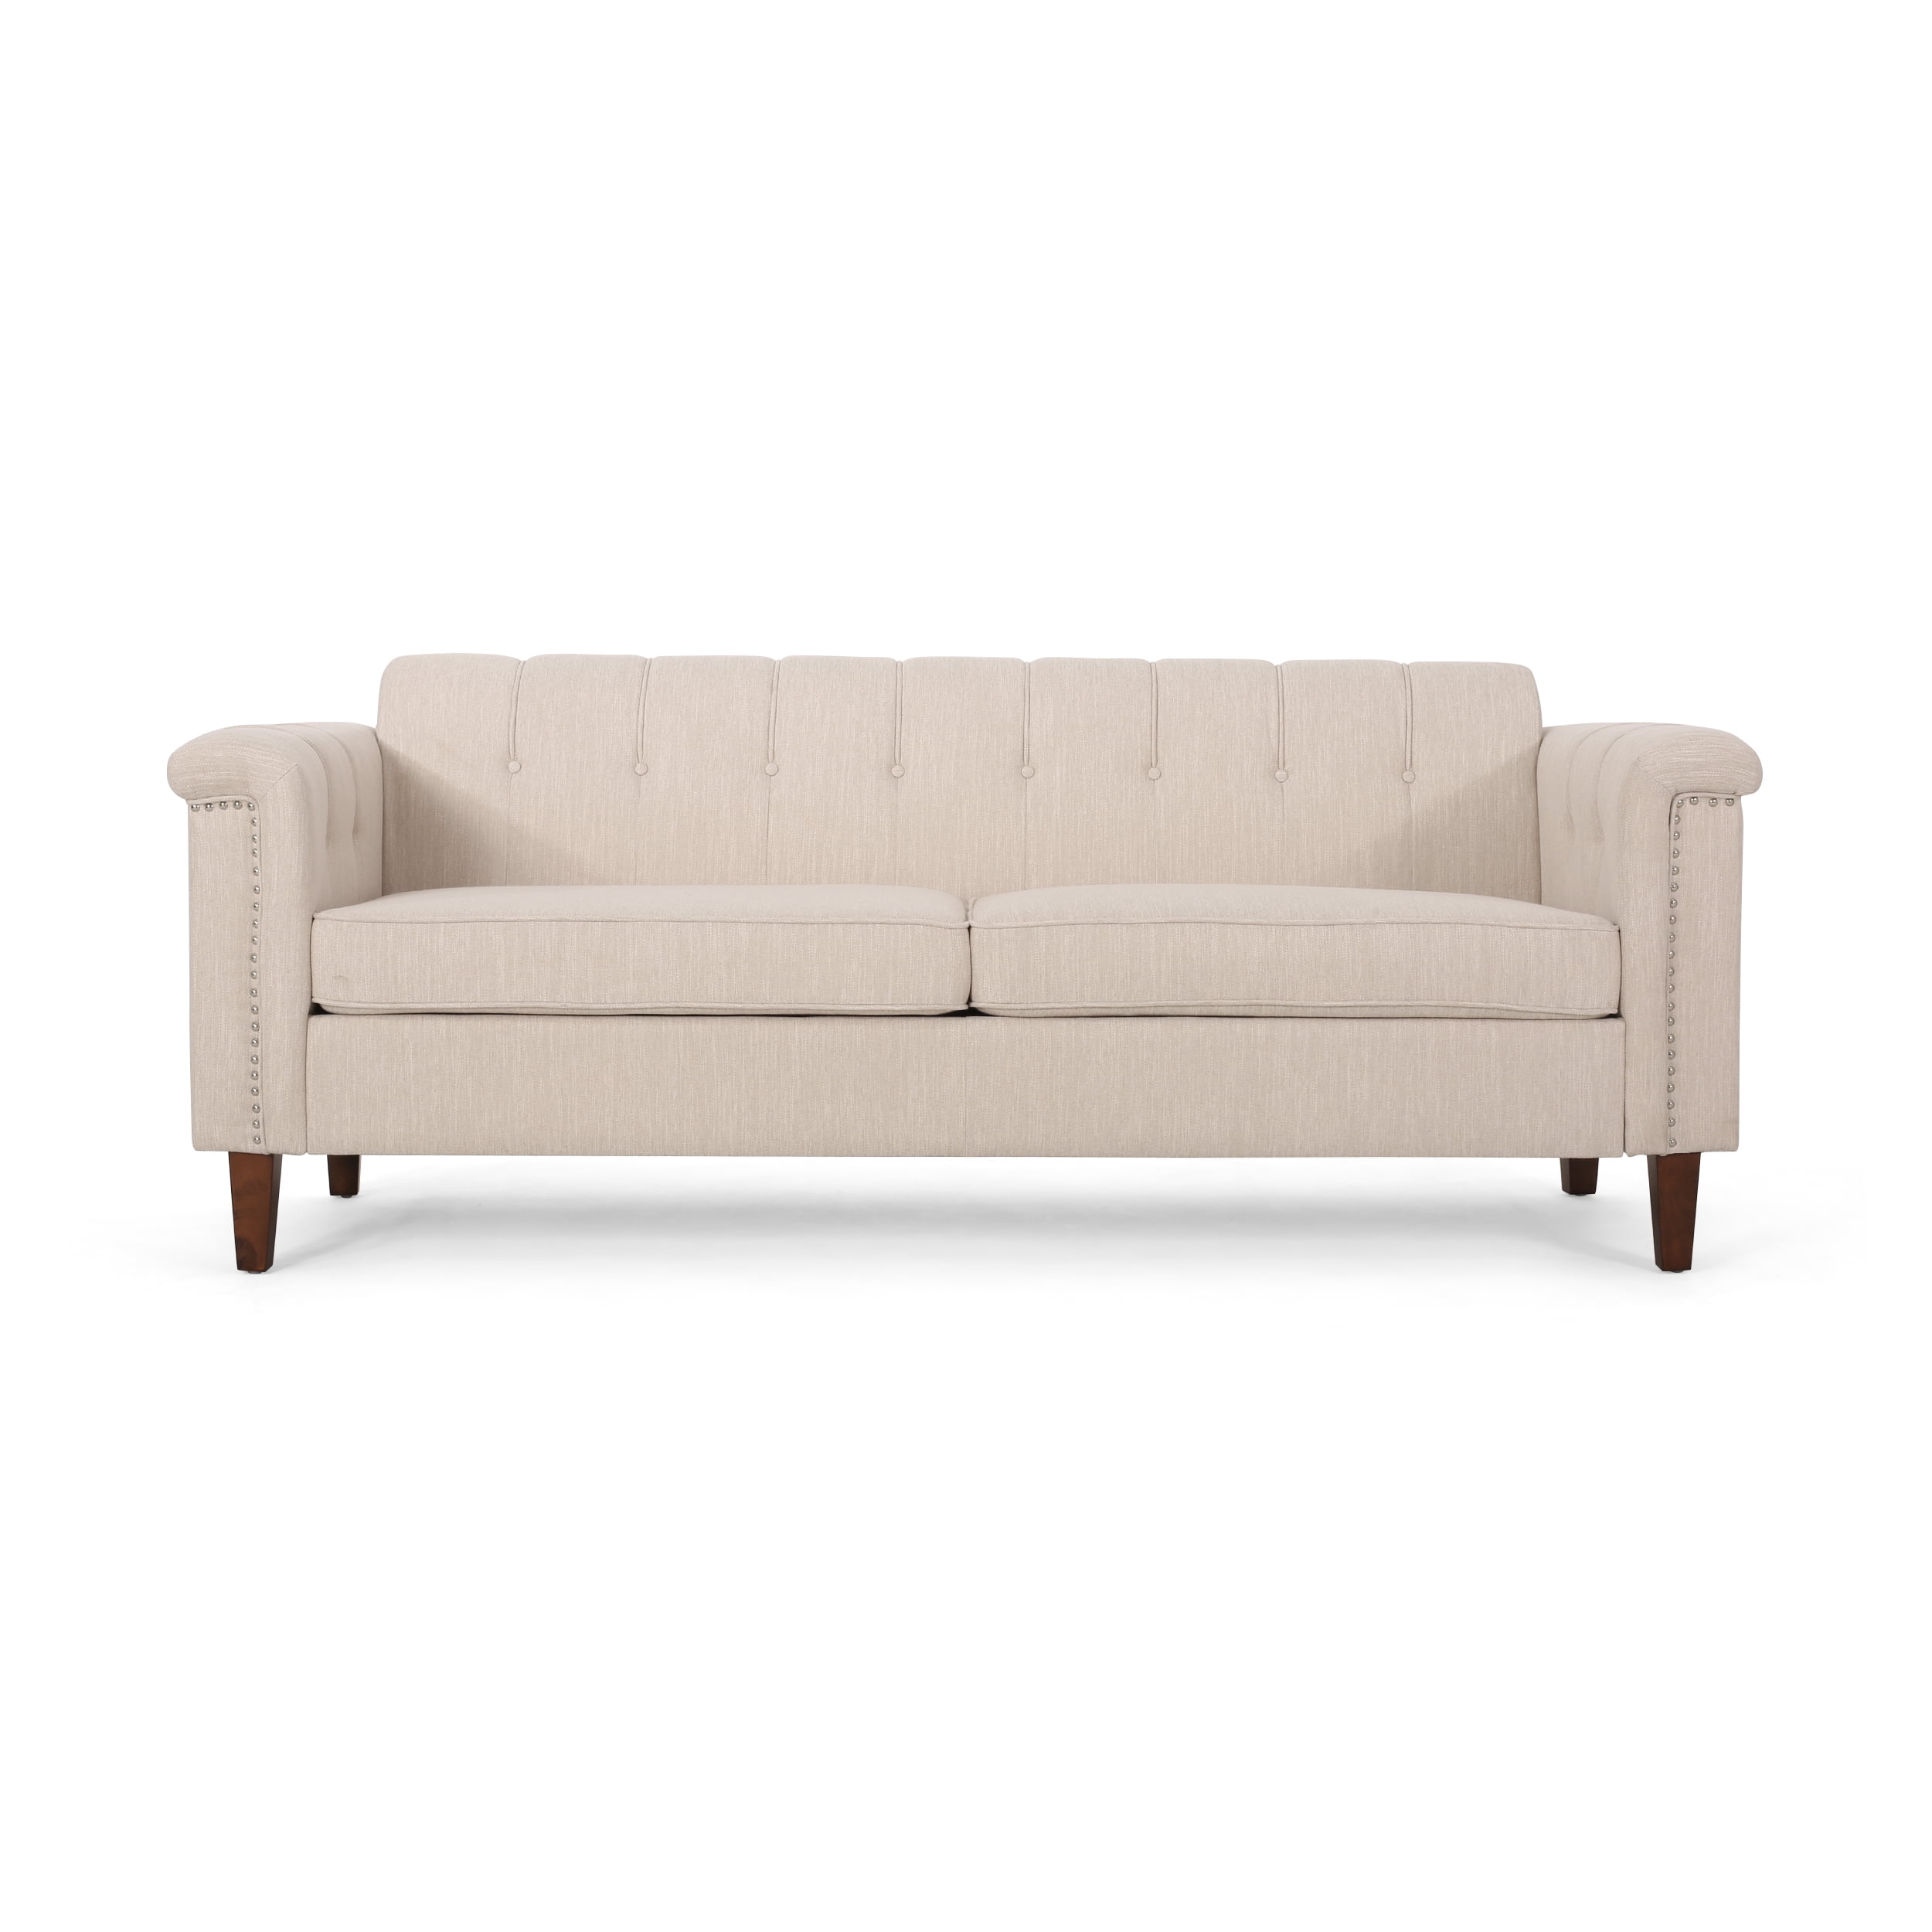 Stitch Fabric 3 Seater Sofa Beige, How Much Fabric For A 3 Seater Sofa